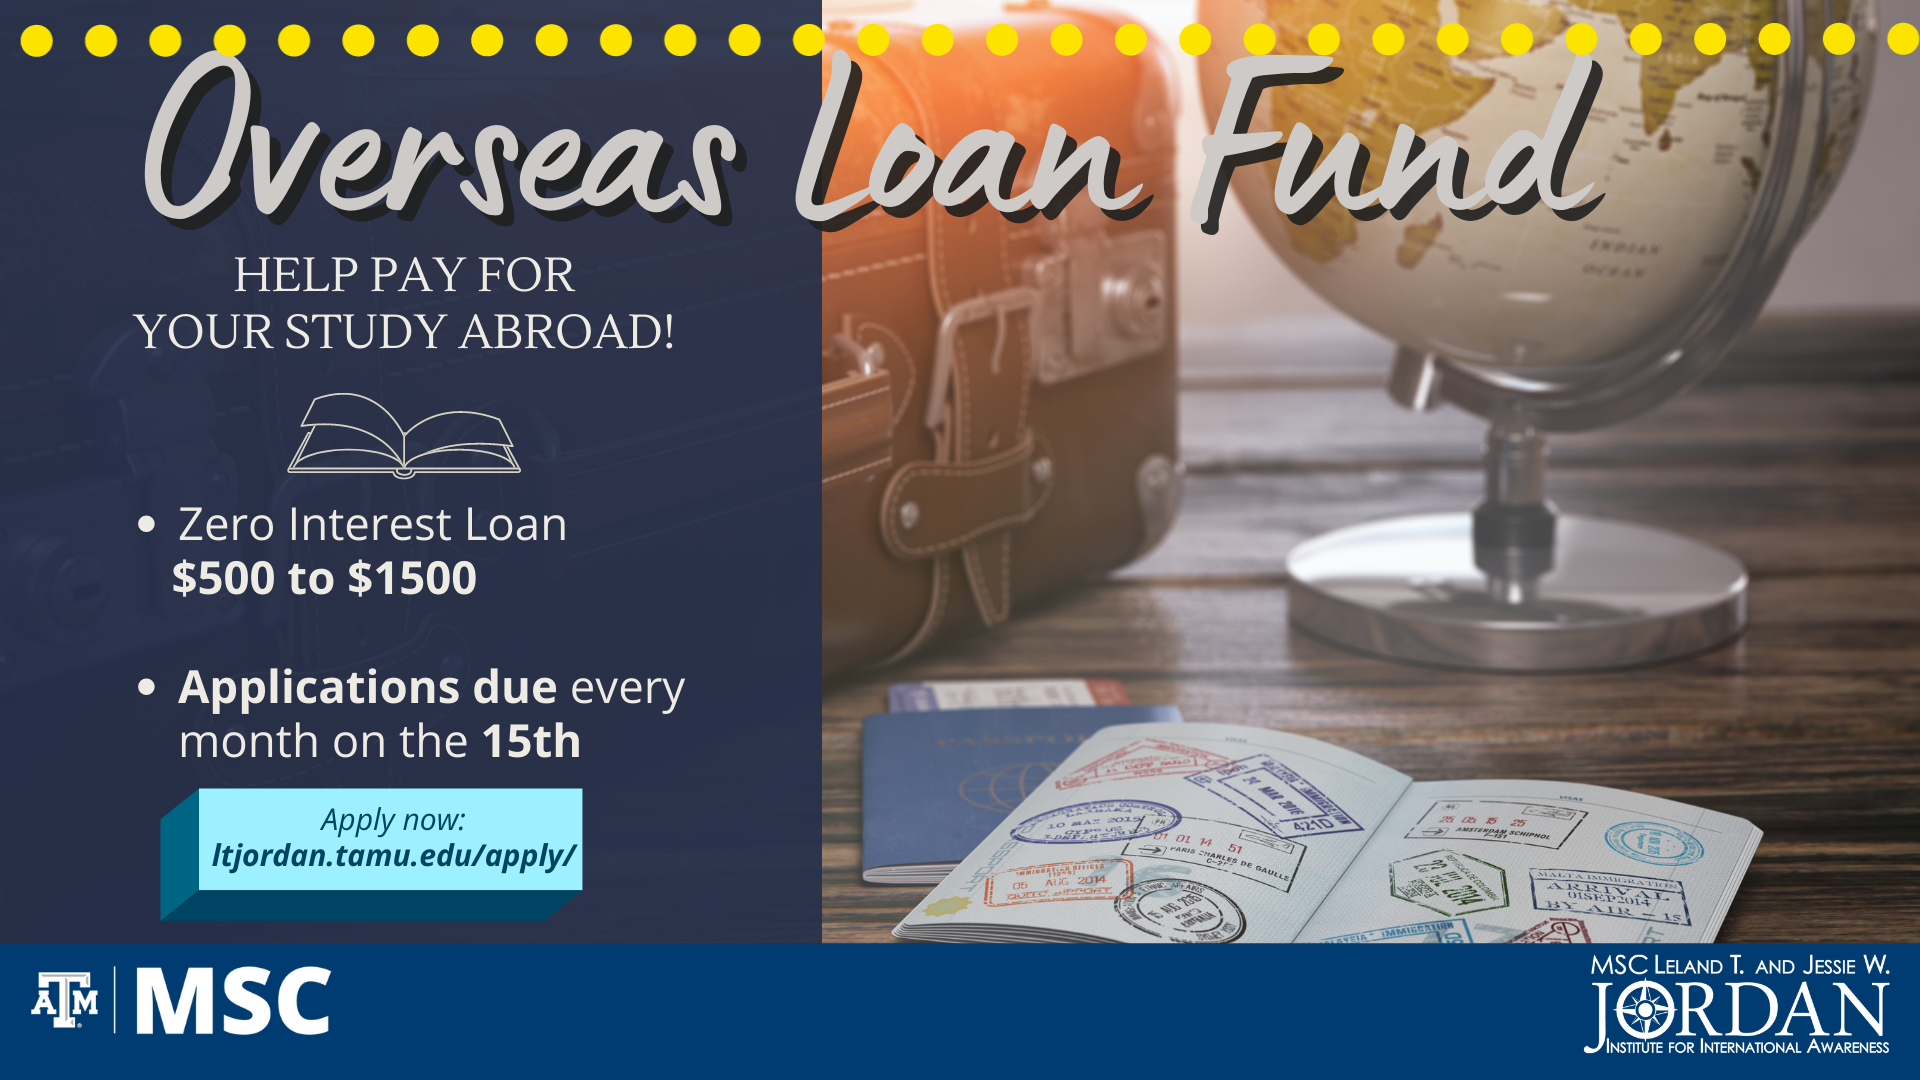 MSC L.T. Jordan Institute presents Overseas Loan Fund. Help pay for your study abroad! Zero Interest Loan $500 to $1500. Applications due every month on the 15th. Apply now ltjordan.tamu.edu/apply/